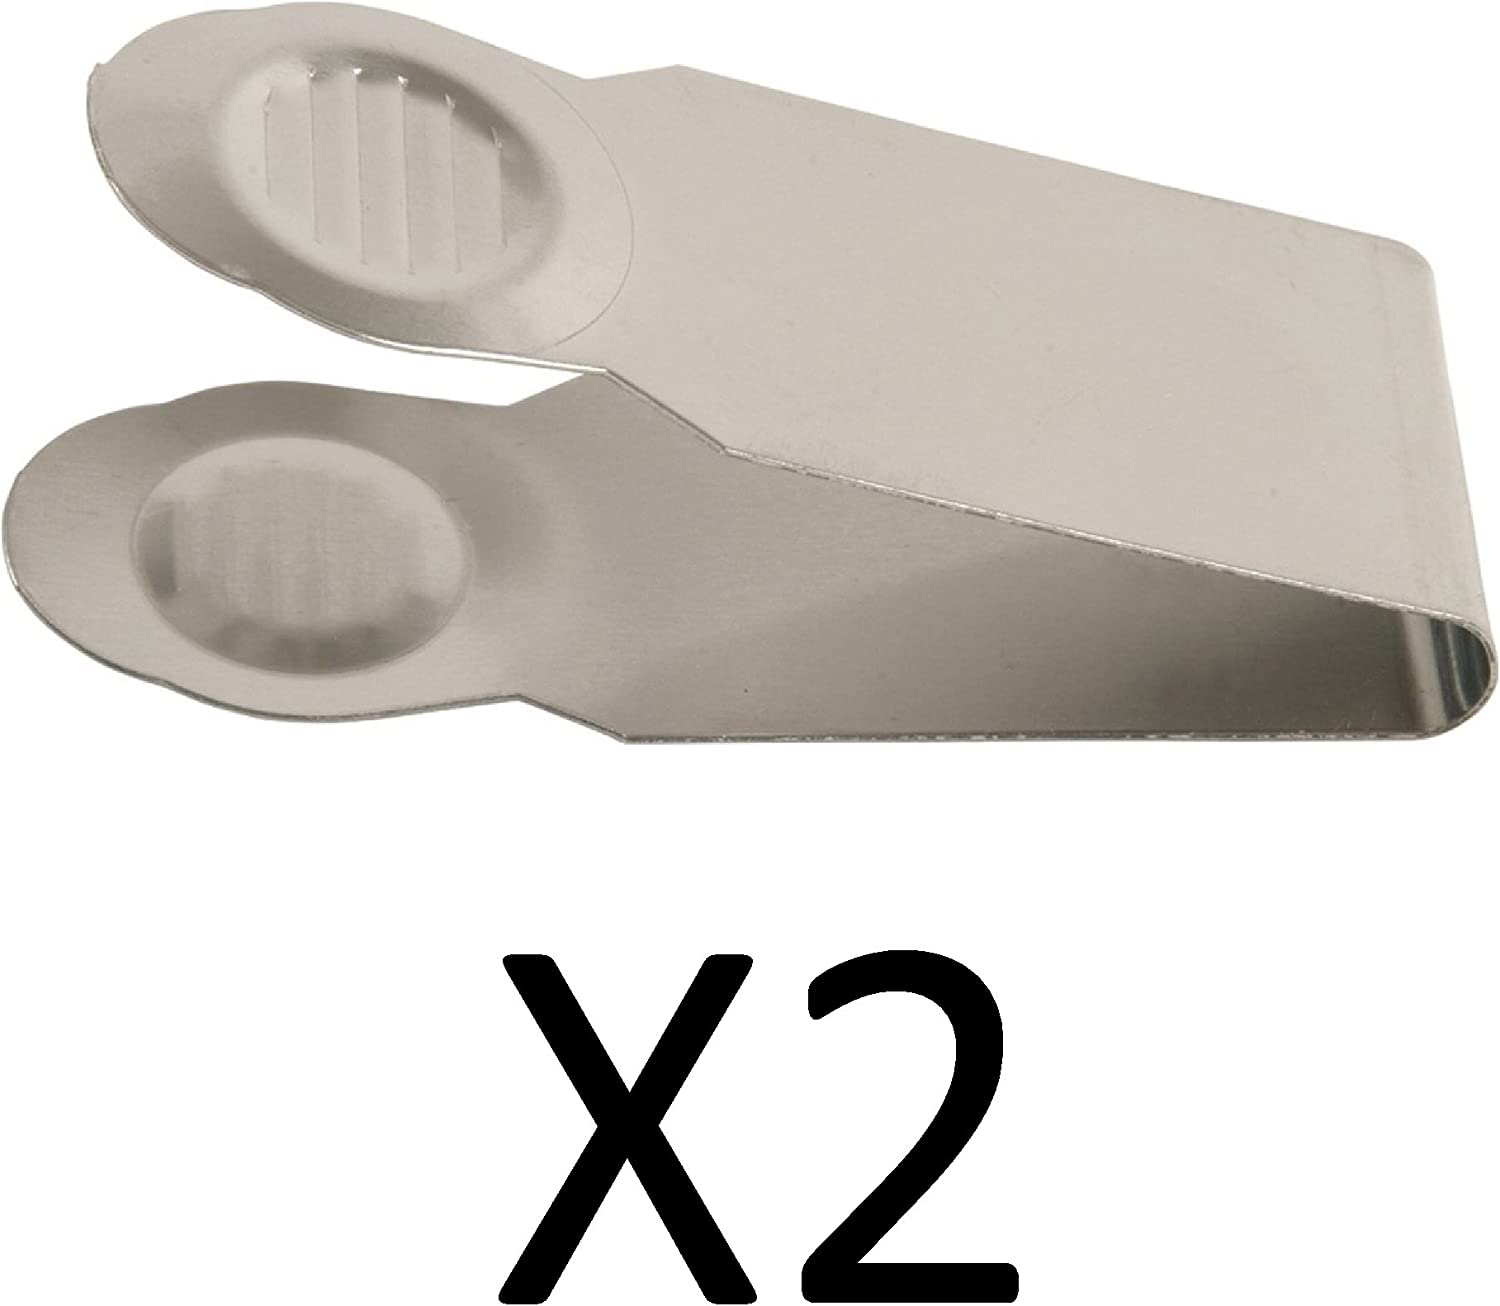 Fox Run Safe Stem-Out Strawberry Hullers, 2-Pack